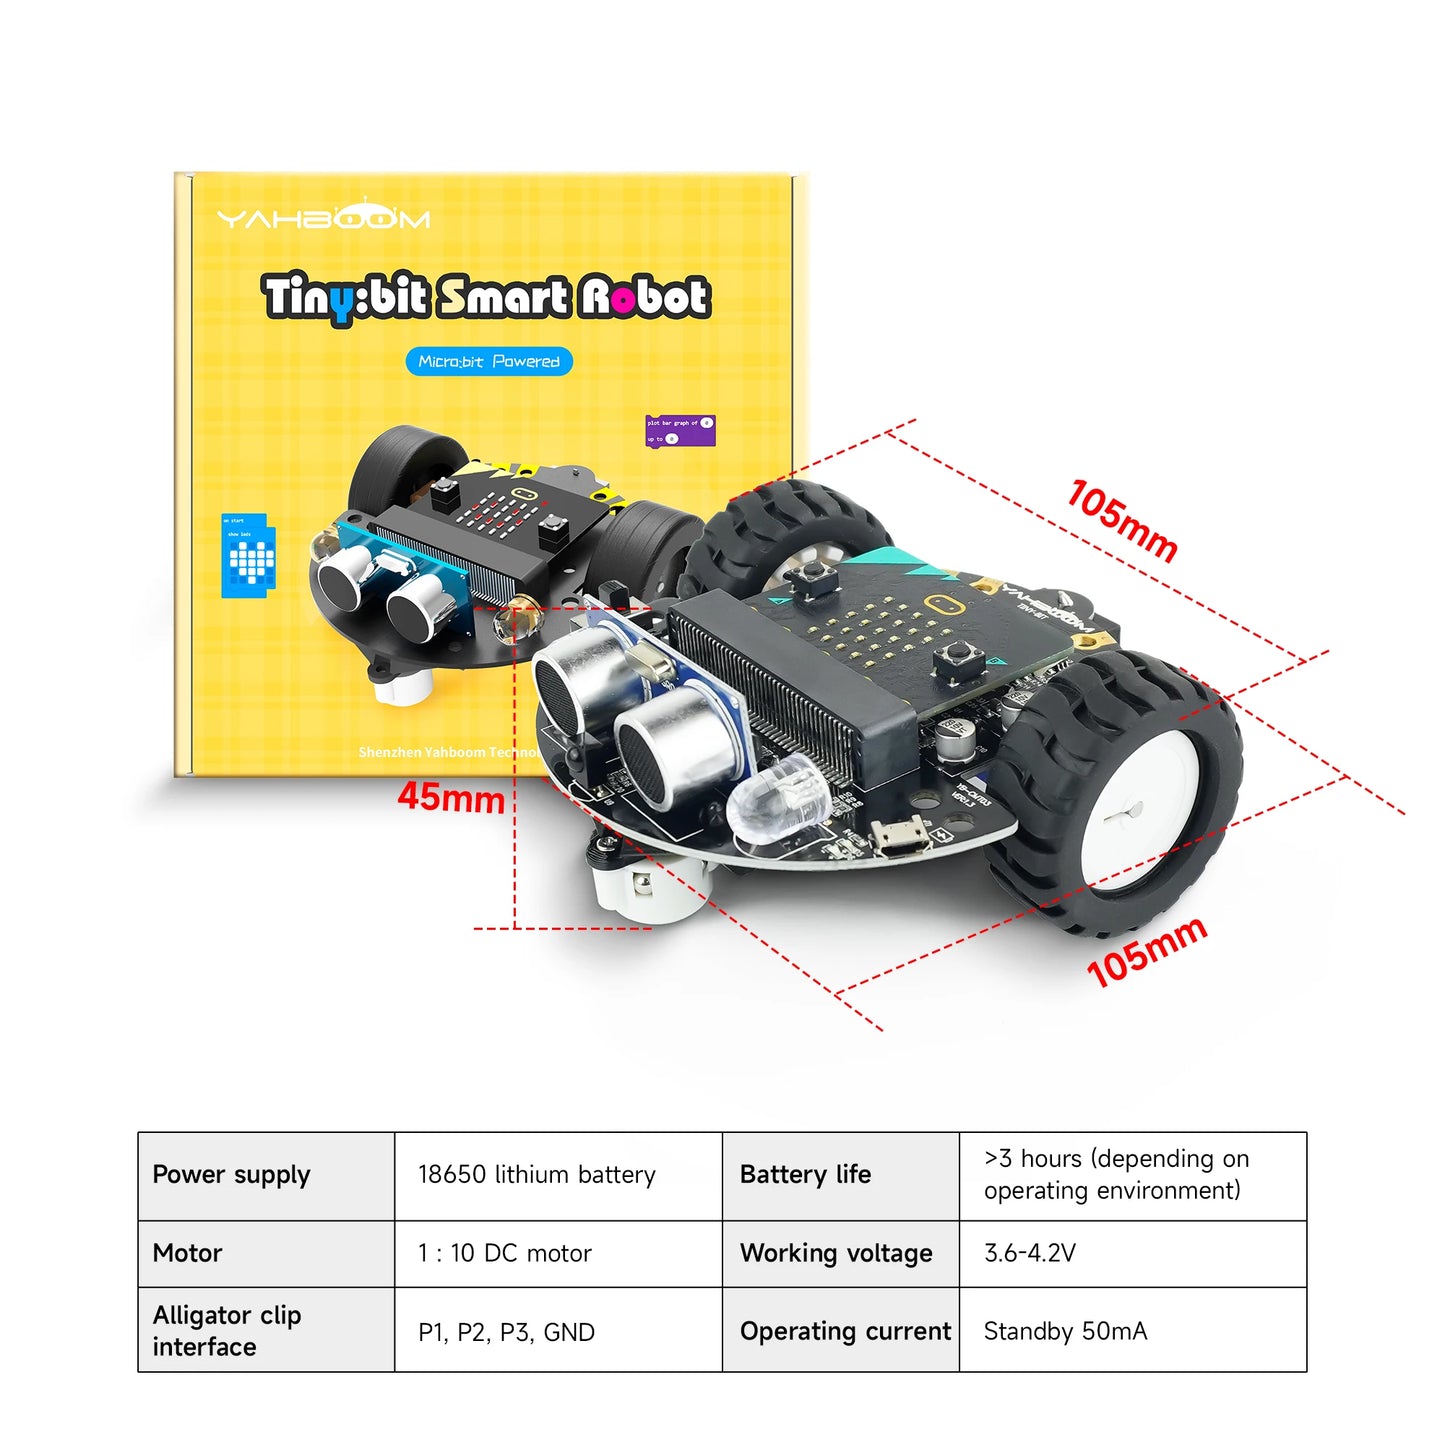 Microbit Coding Robotics Car Kit for STEM Education - Yahboom Tinybit V2 V1 with Python and MakeCode Programming